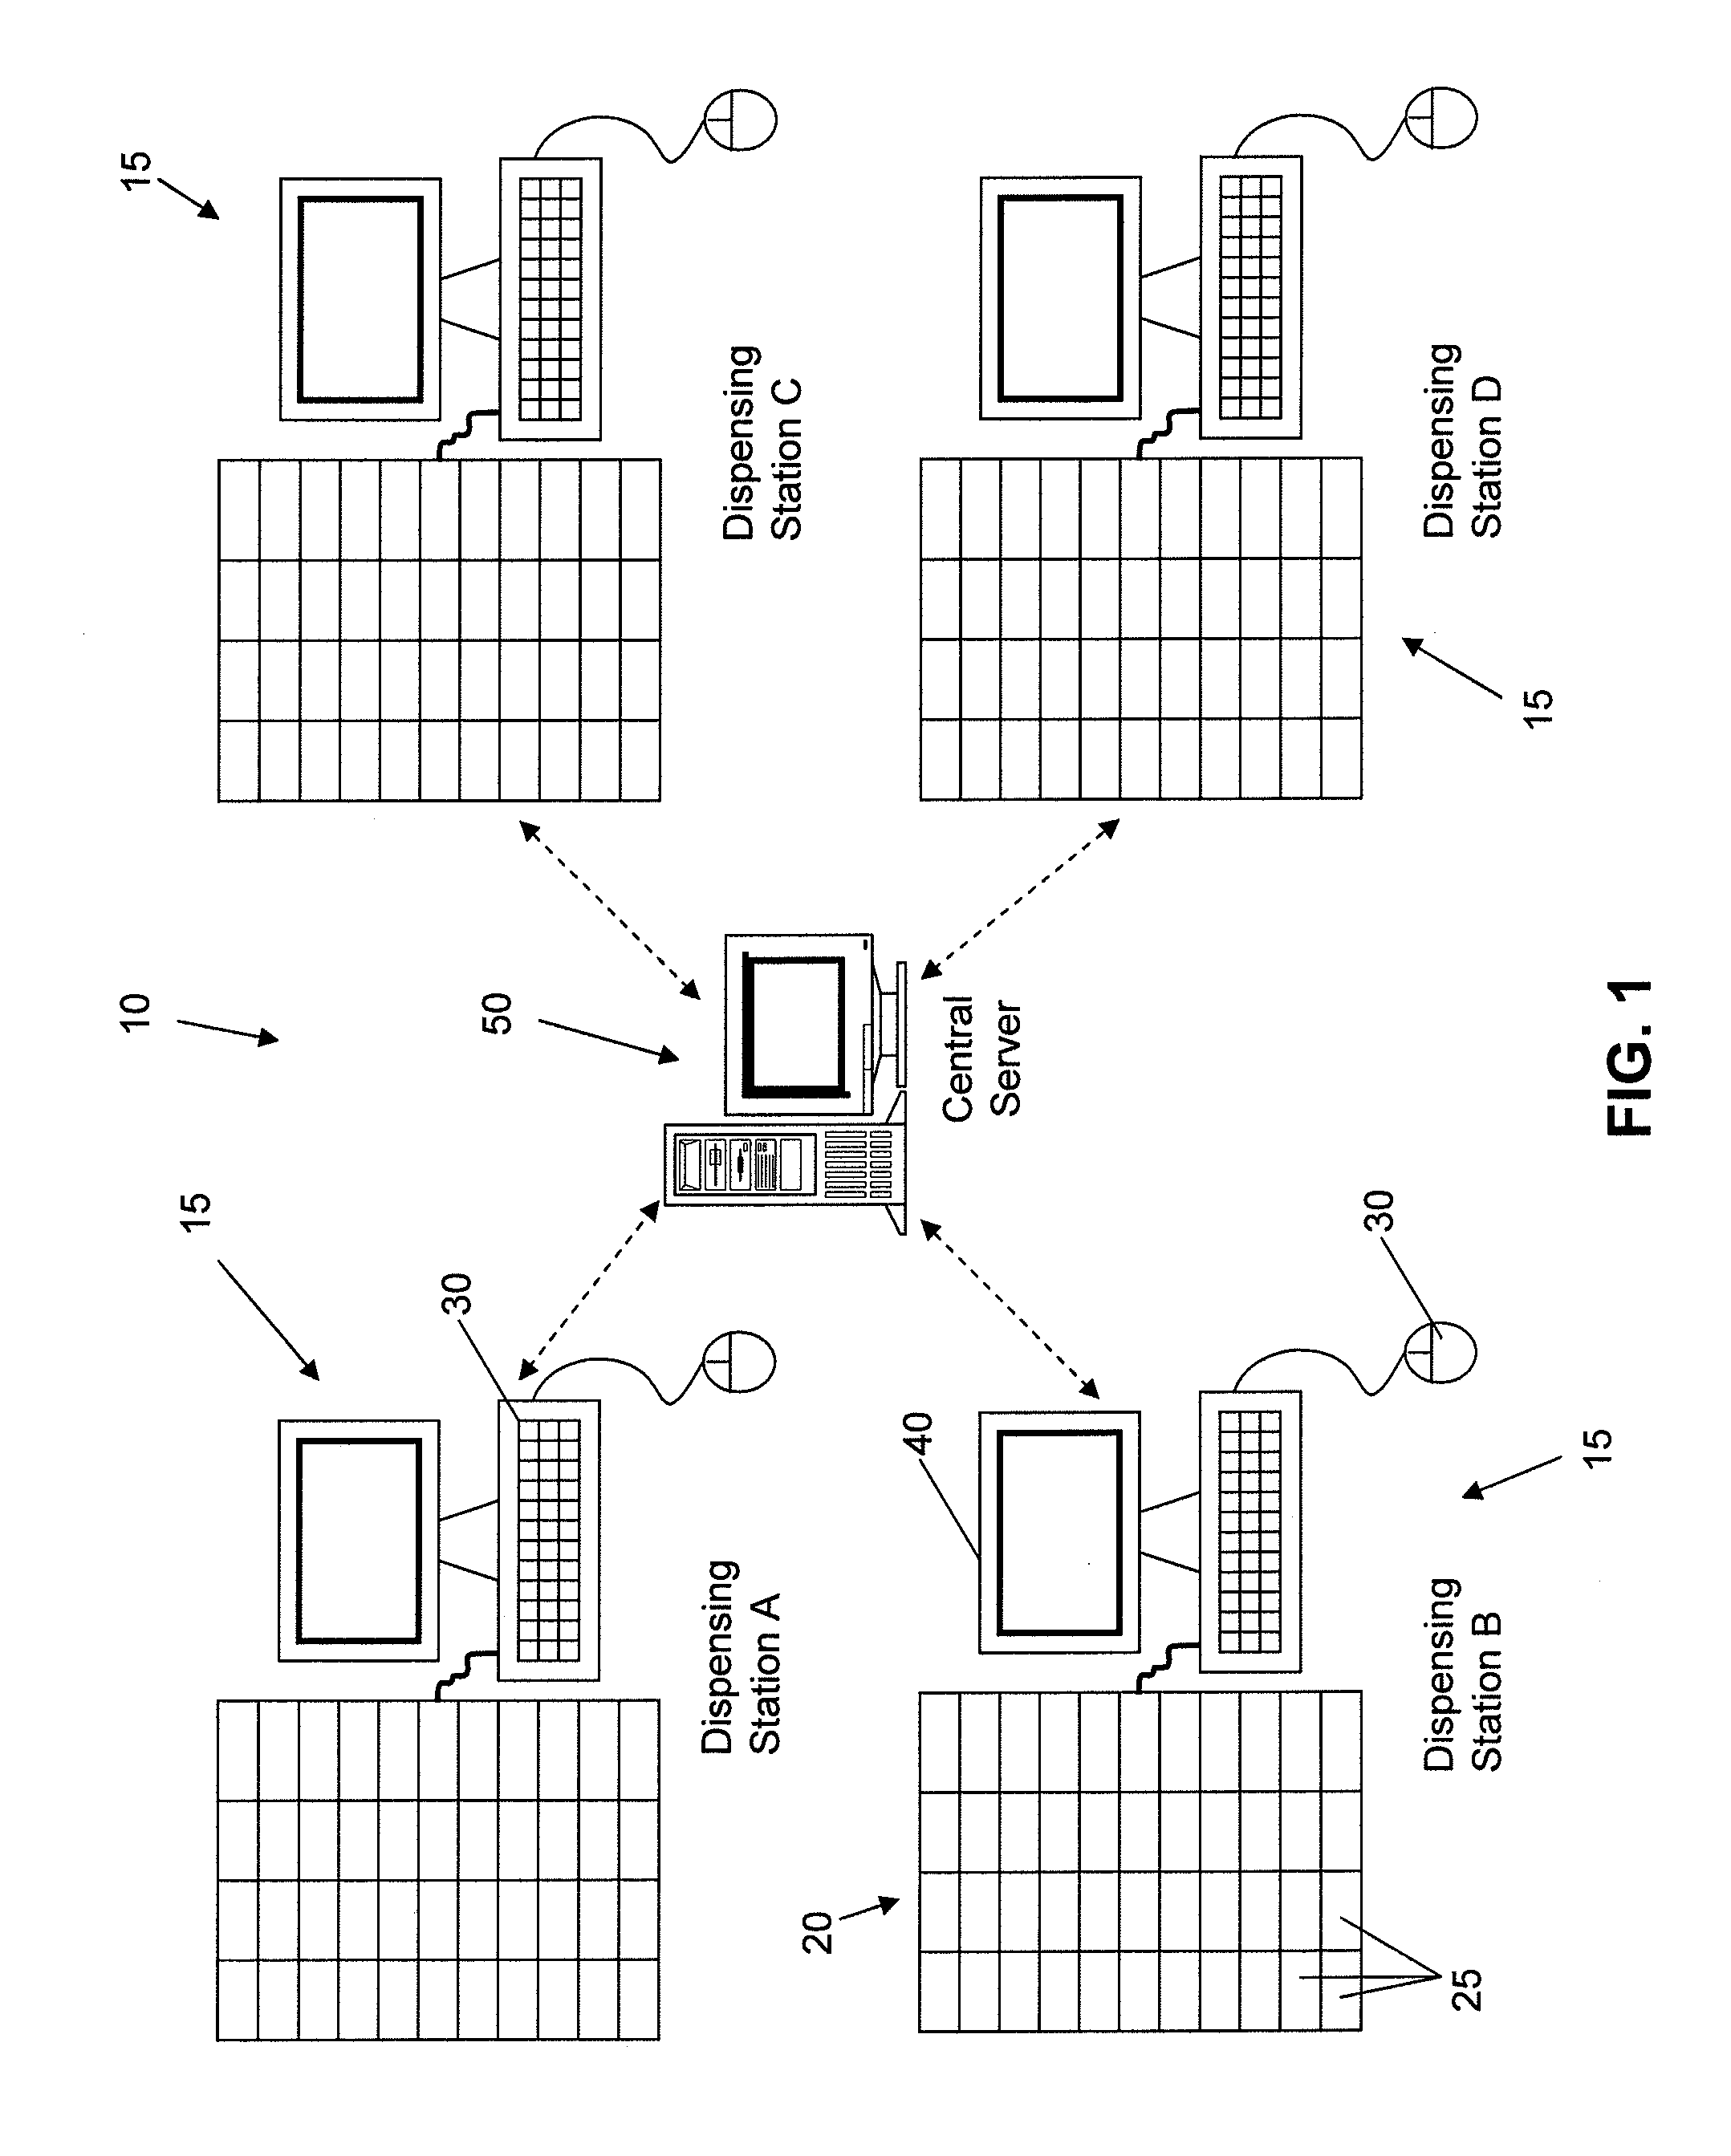 Systems and methods for detecting diversion in drug dispensing